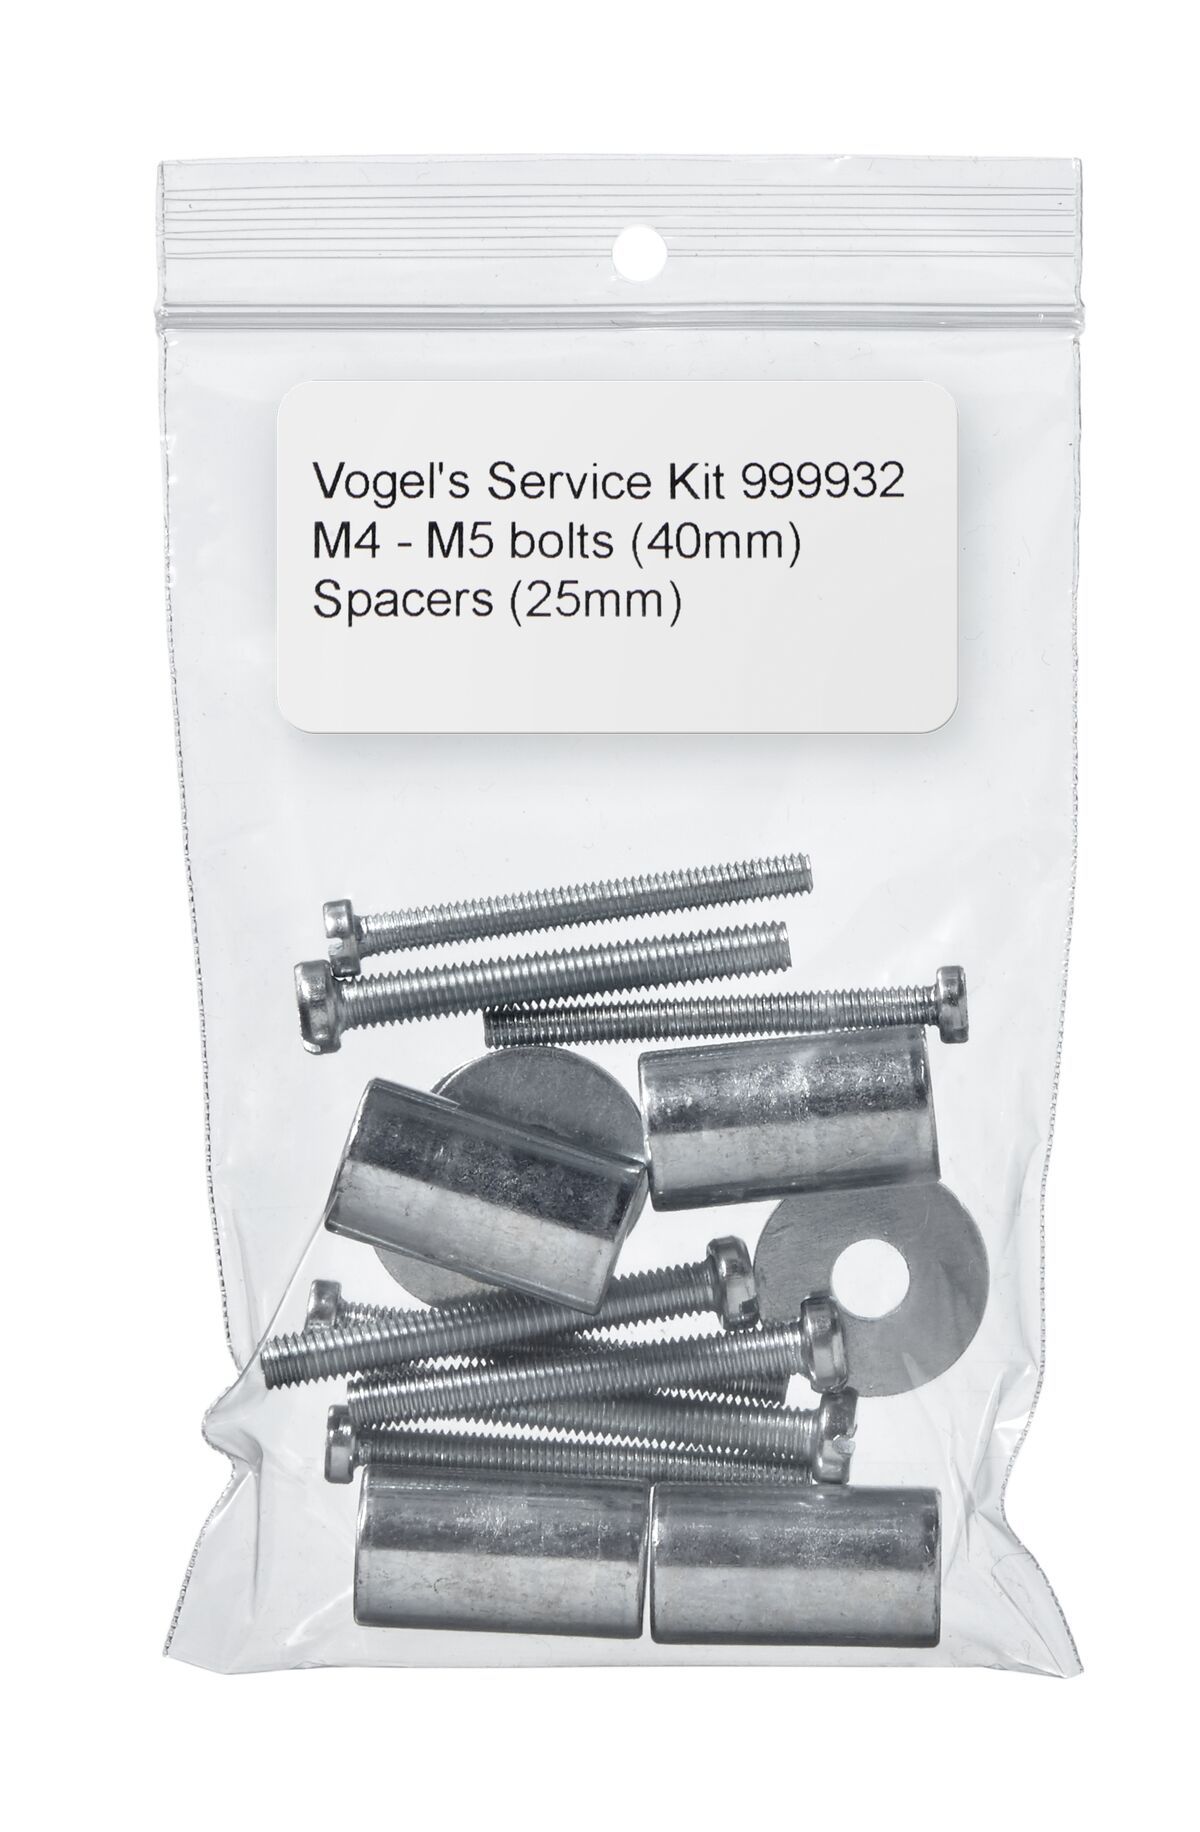 Vogel's Service Kit - Spacers (25 mm), M4-M5 bolts (40 mm) - Product